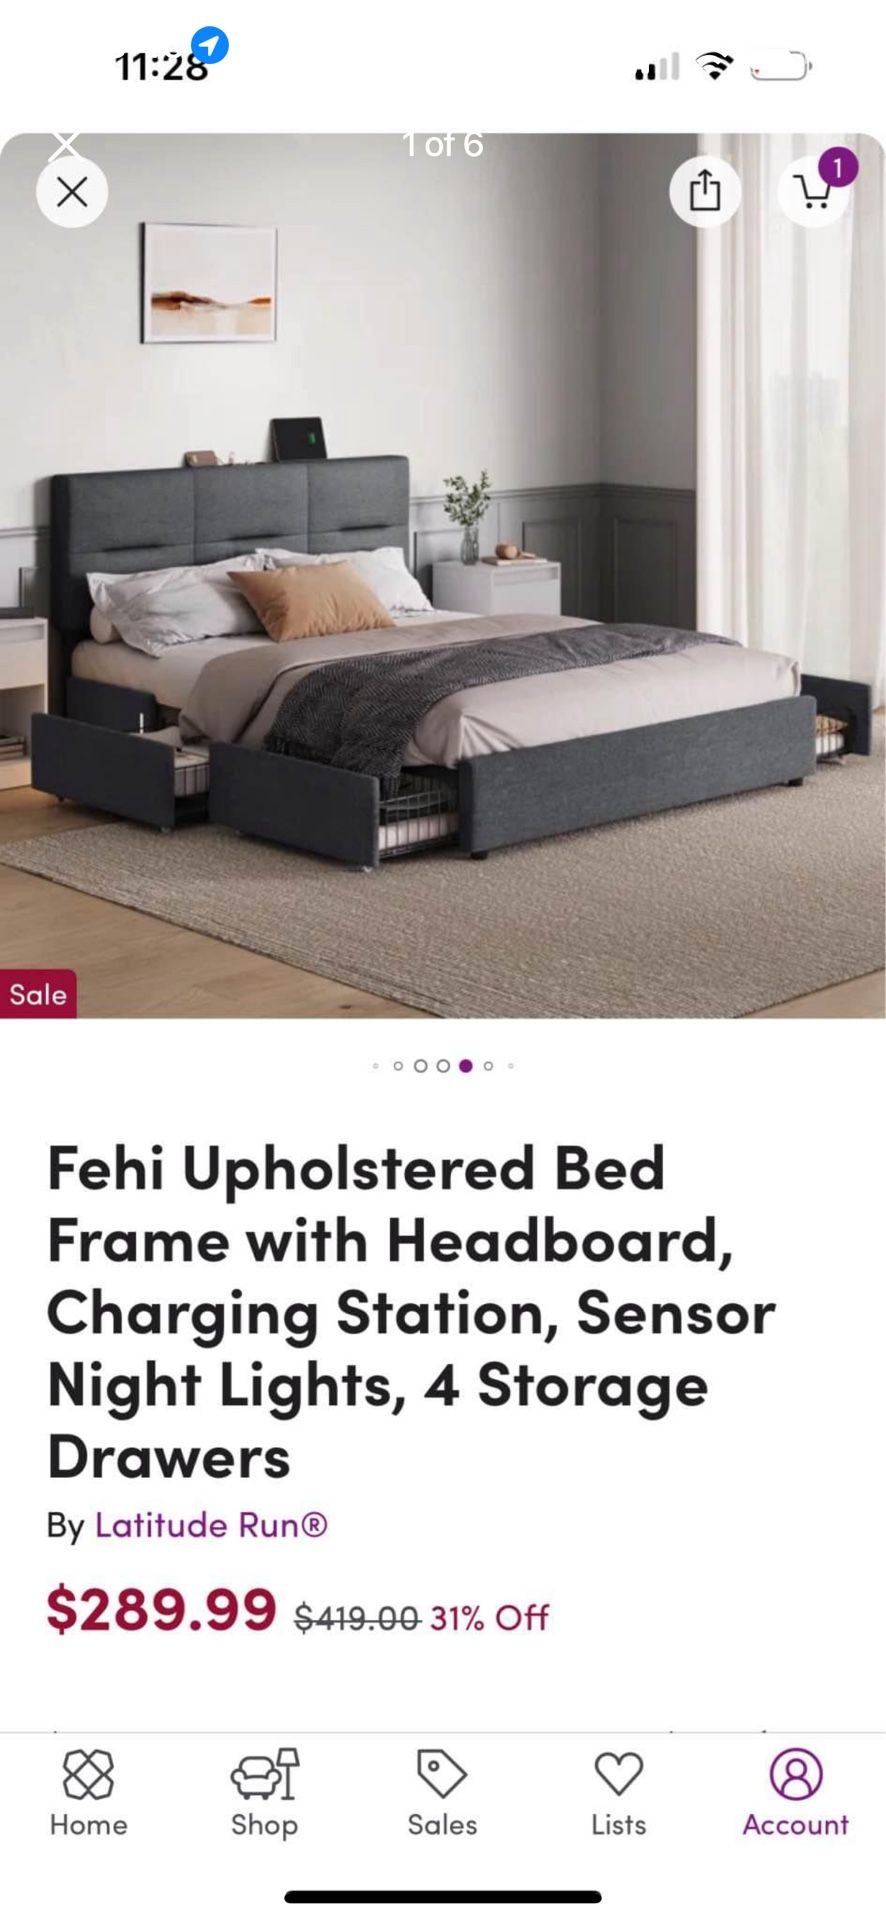 Queen Fehi Upholstered Bed Frame with Headboard, 4 Storage Drawers，Charging Station, Sensor Night Lights